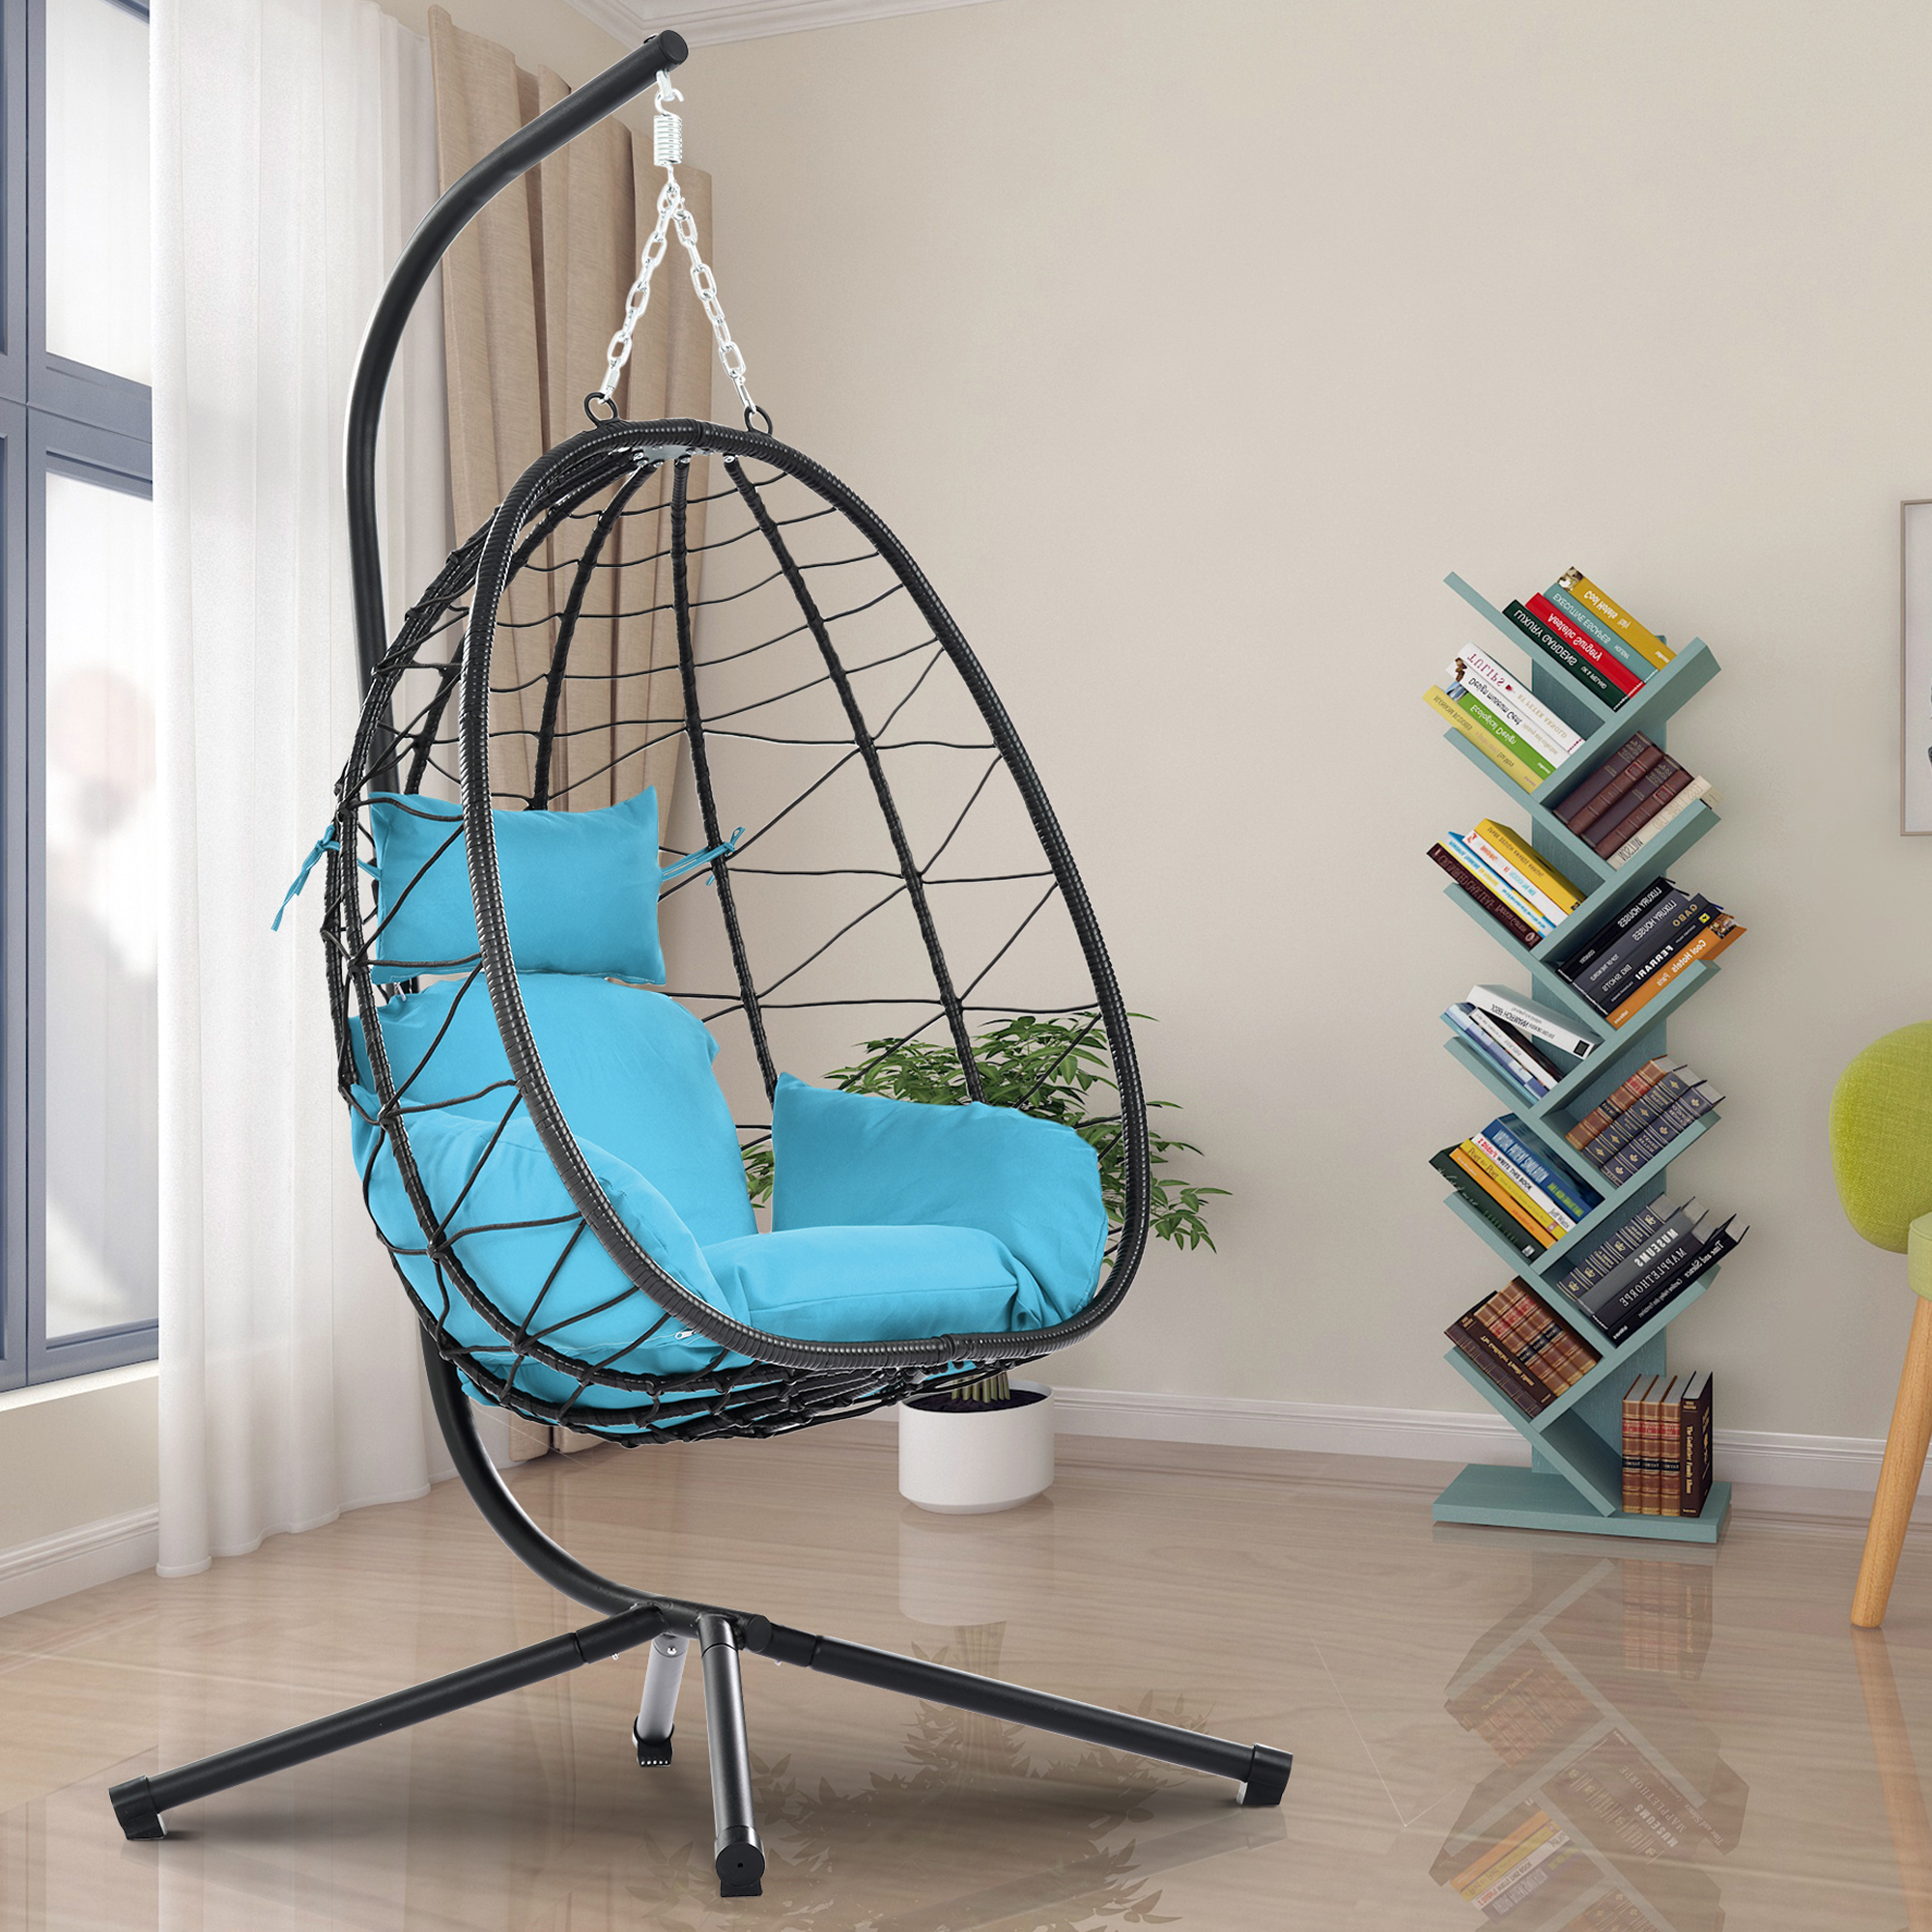 Egg Chair, Indoor Outdoor Patio Wicker Hanging Chair with Stand, Hanging Swing Chair w/ Cushion, Durable All-Weather UV Rattan Lounge Chair for Bedroom, Patio, Deck, Yard, Garden, 350lbs, Blue, SS1968 - image 3 of 9